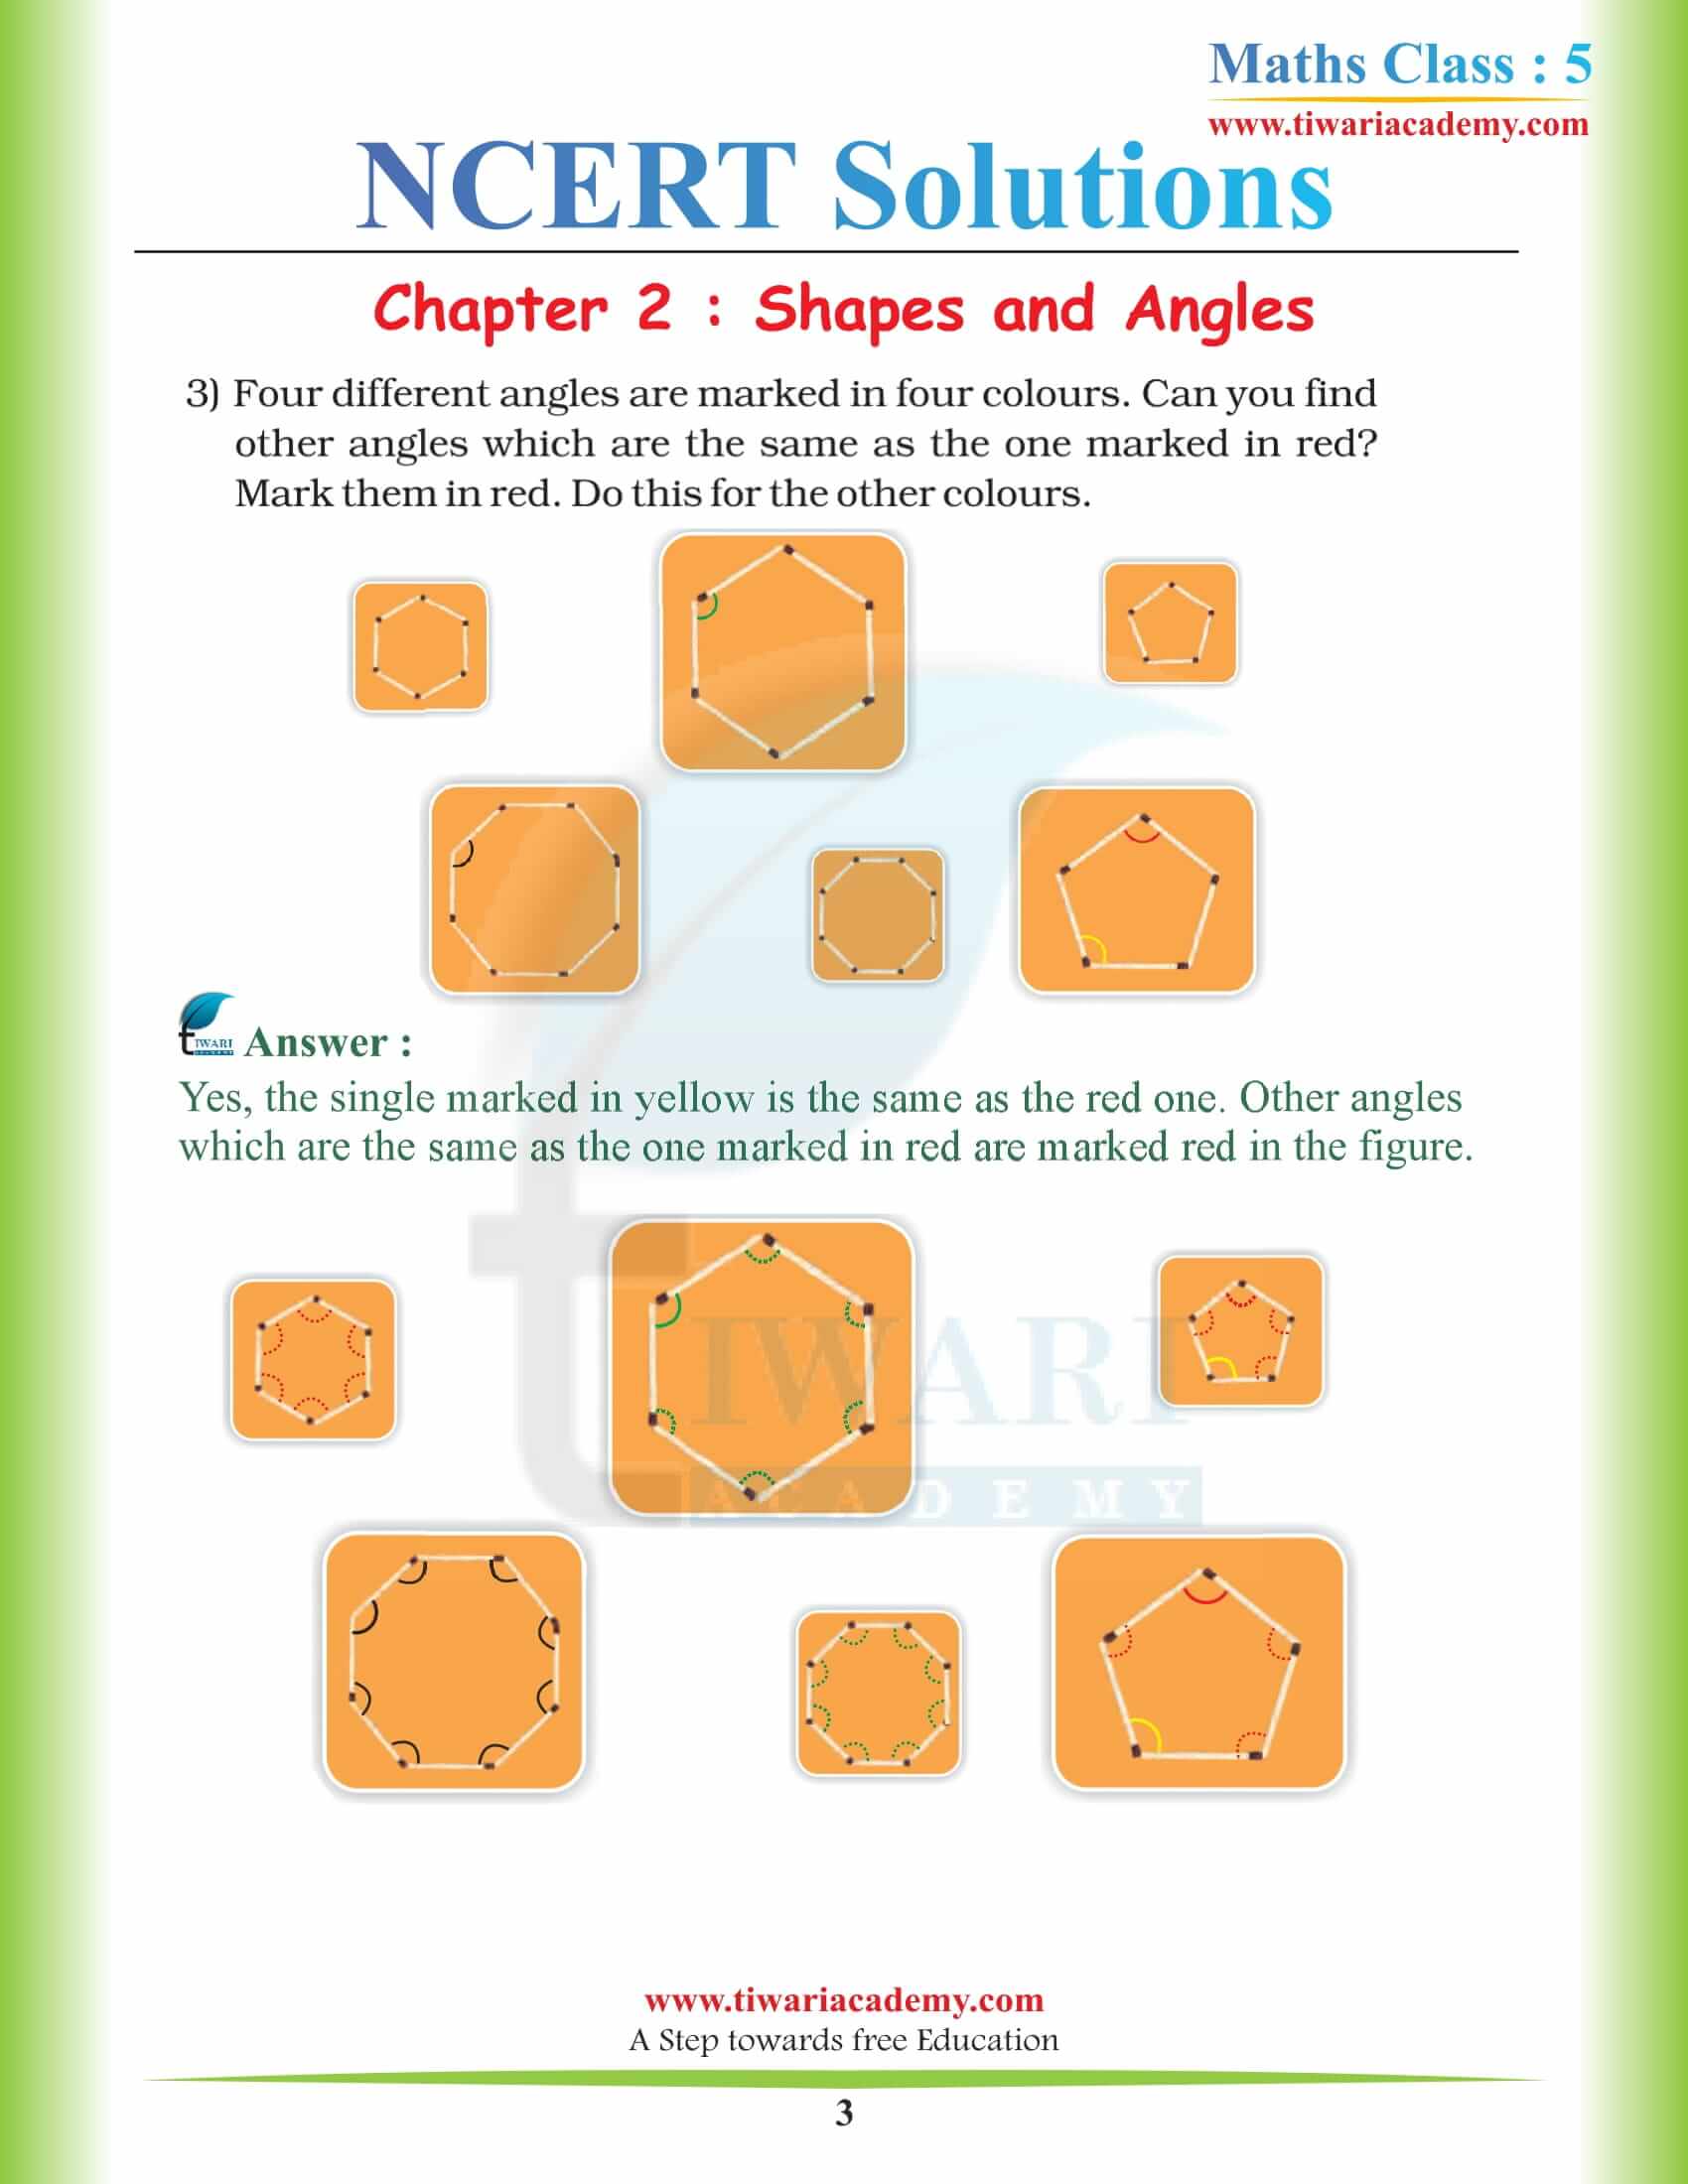 NCERT Solutions for Class 5 Maths Chapter 2 pdf download